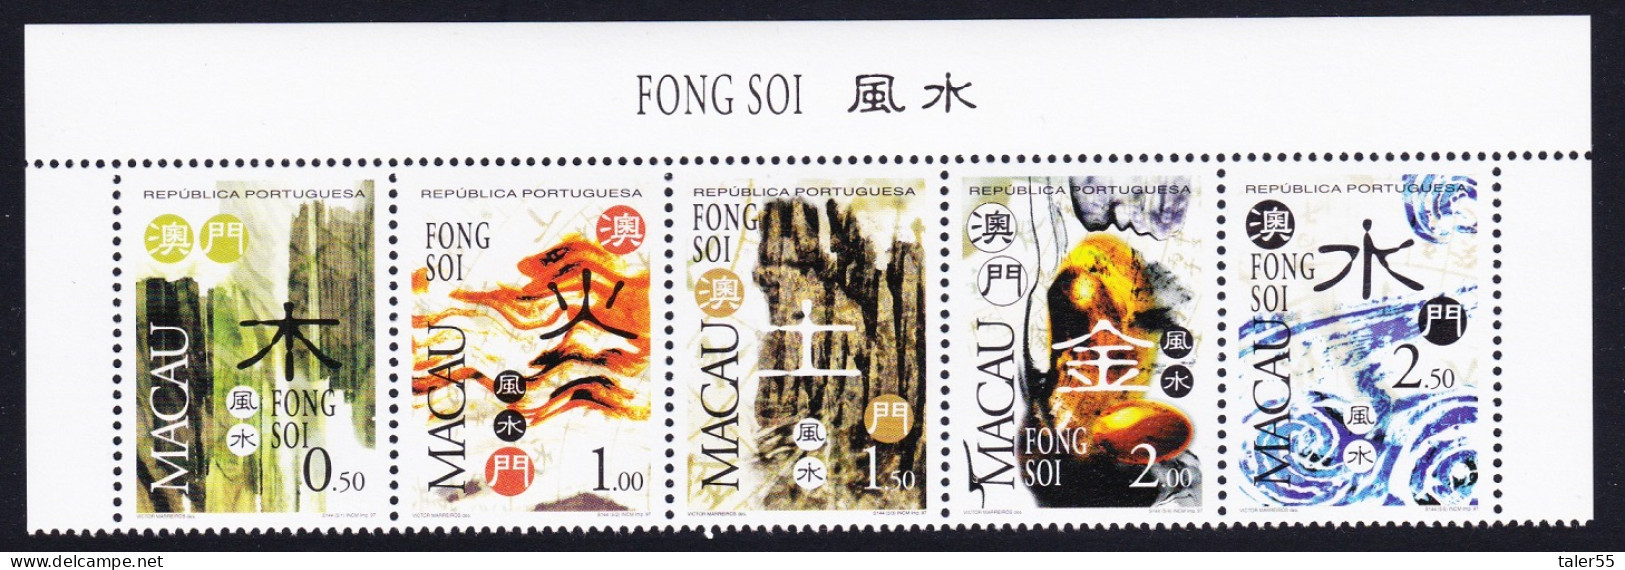 Macao Macau Feng Shui The Five Elements Top Strip Of 5 1997 MNH SG#1012-1016 MI#937-941 Sc#902a - Unused Stamps